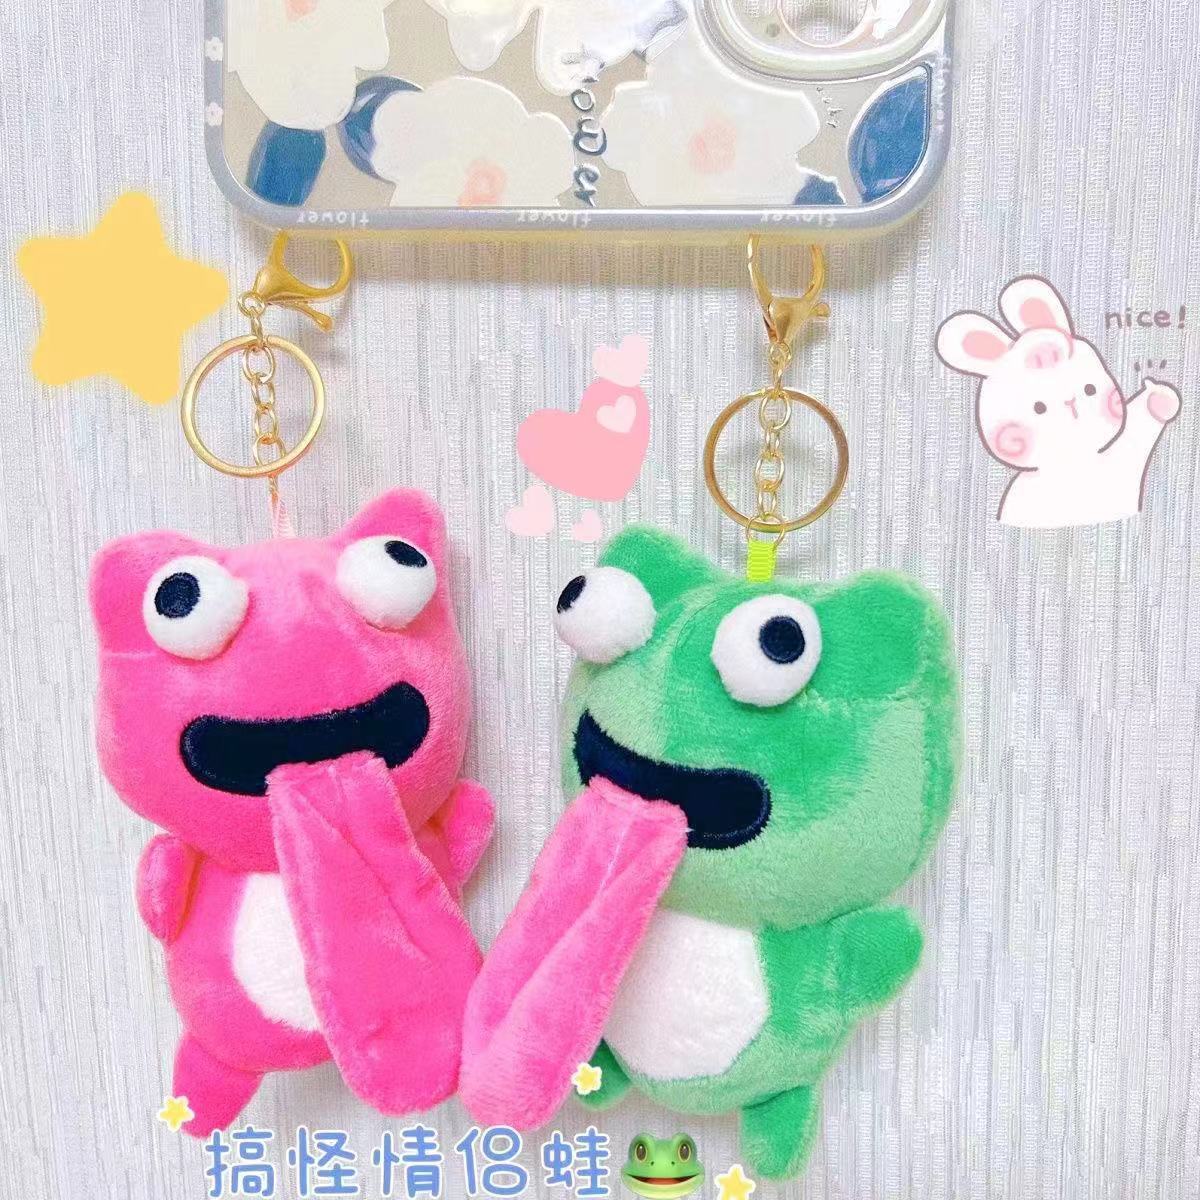 New Couple Sticking Out Tongue Frog Magnetic Keychain with Stretchable Eyes as a Gift for Boyfriend and Girlfriend